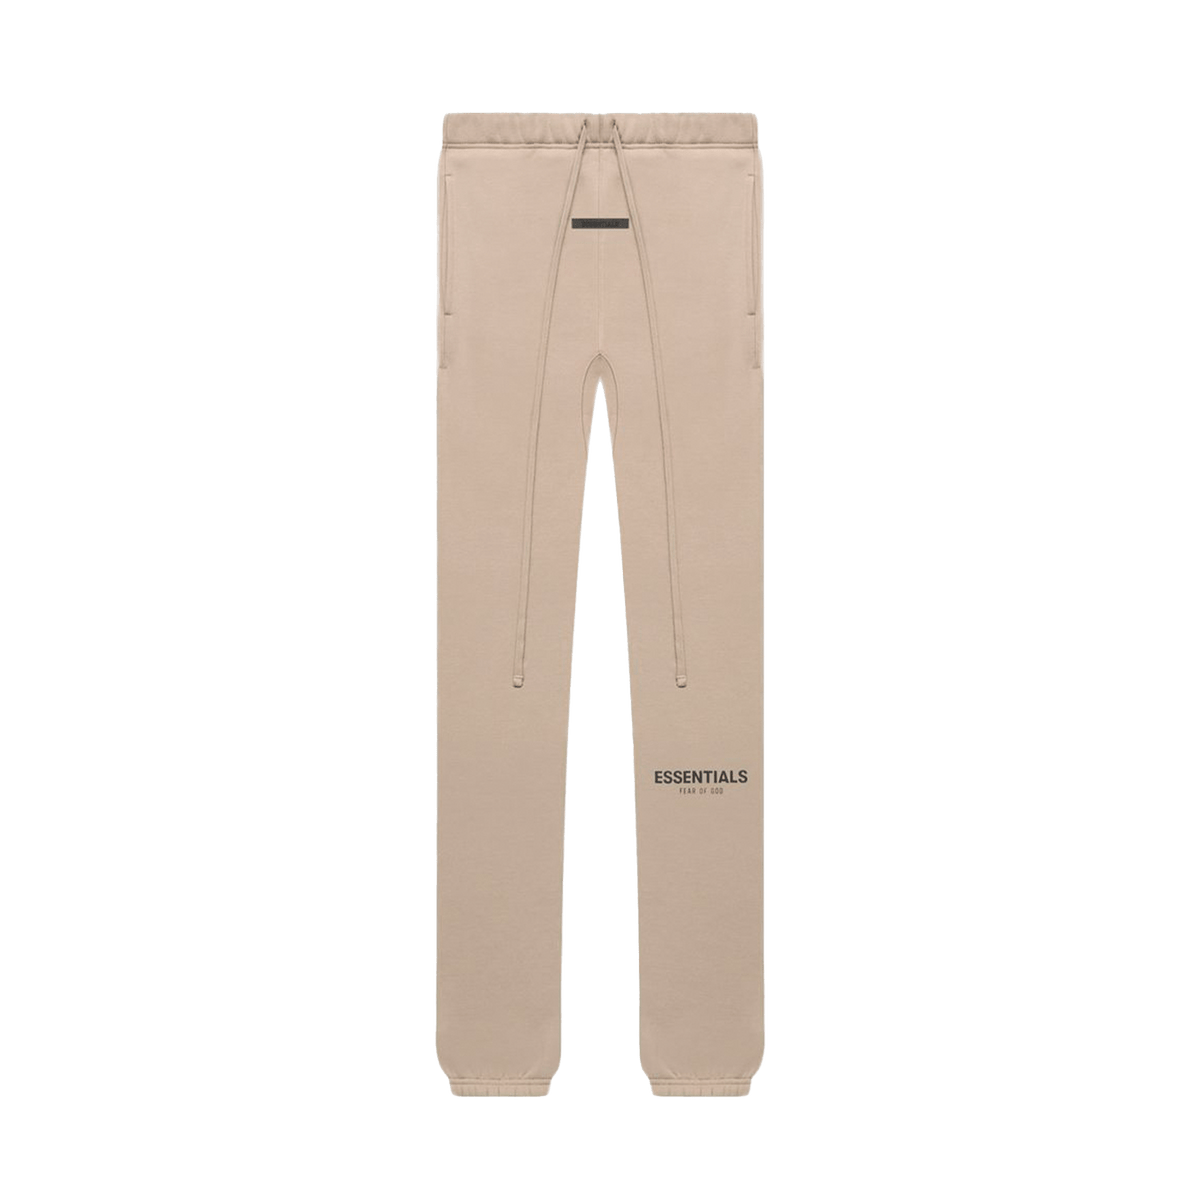 Fear of God Essentials Core Collection Sweatpant 'String' - Kick Game